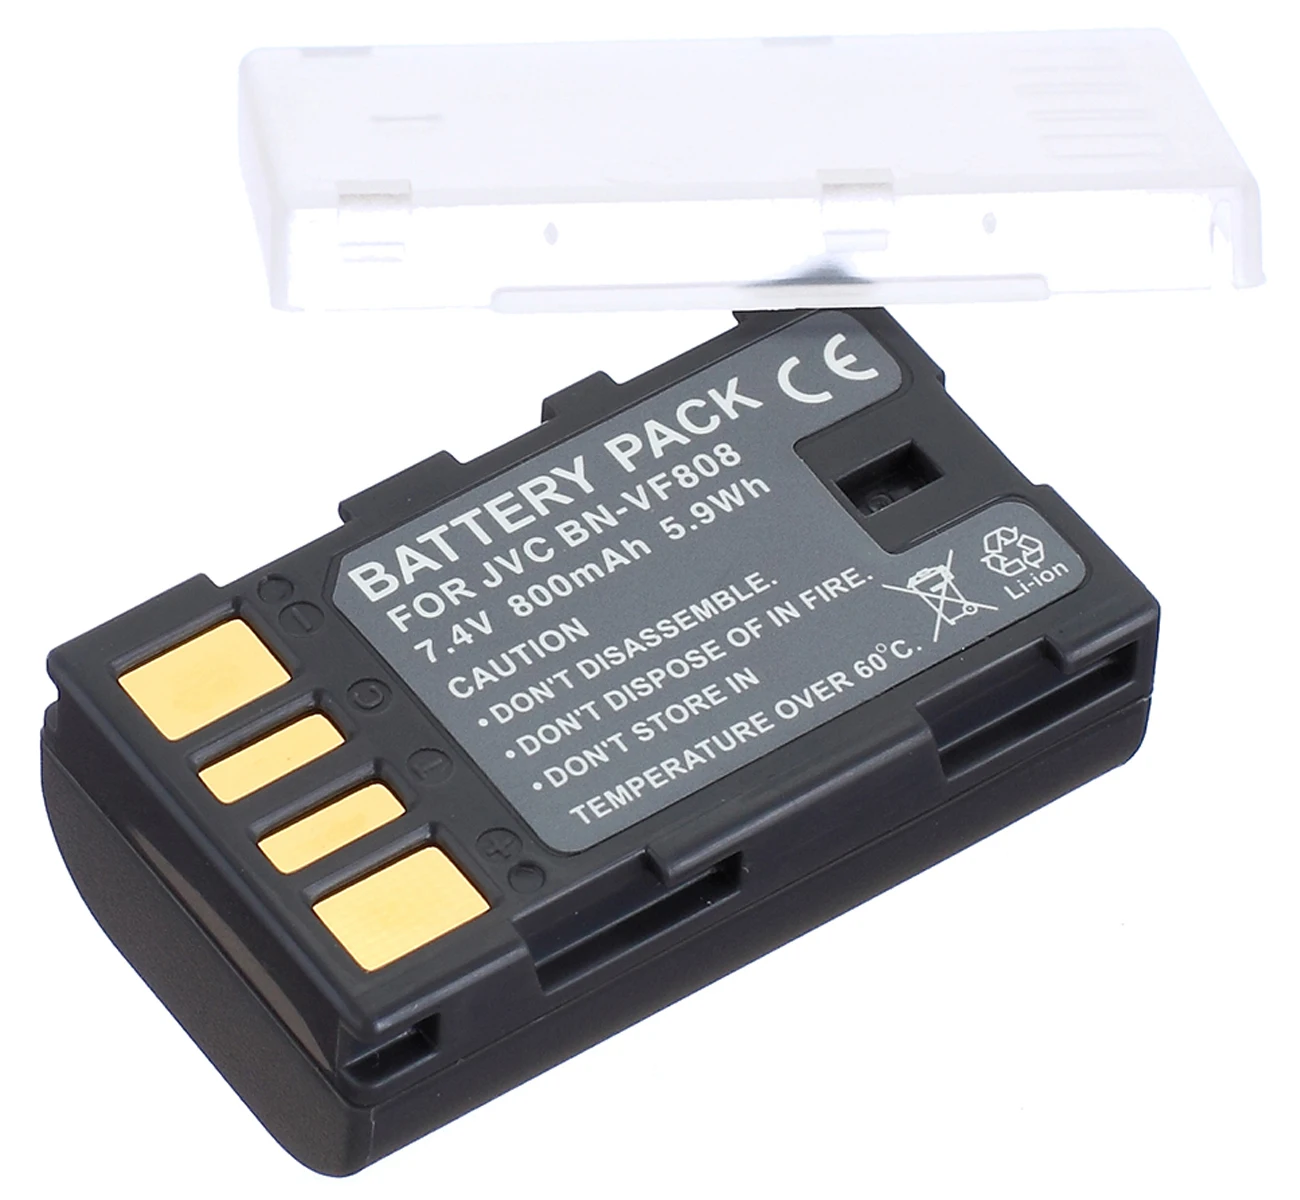 Rechargeable Li-ion Battery Pack For JVC Everio GZ-MS100U GZ-MS100RUS Camcorder GZ-MS100RU